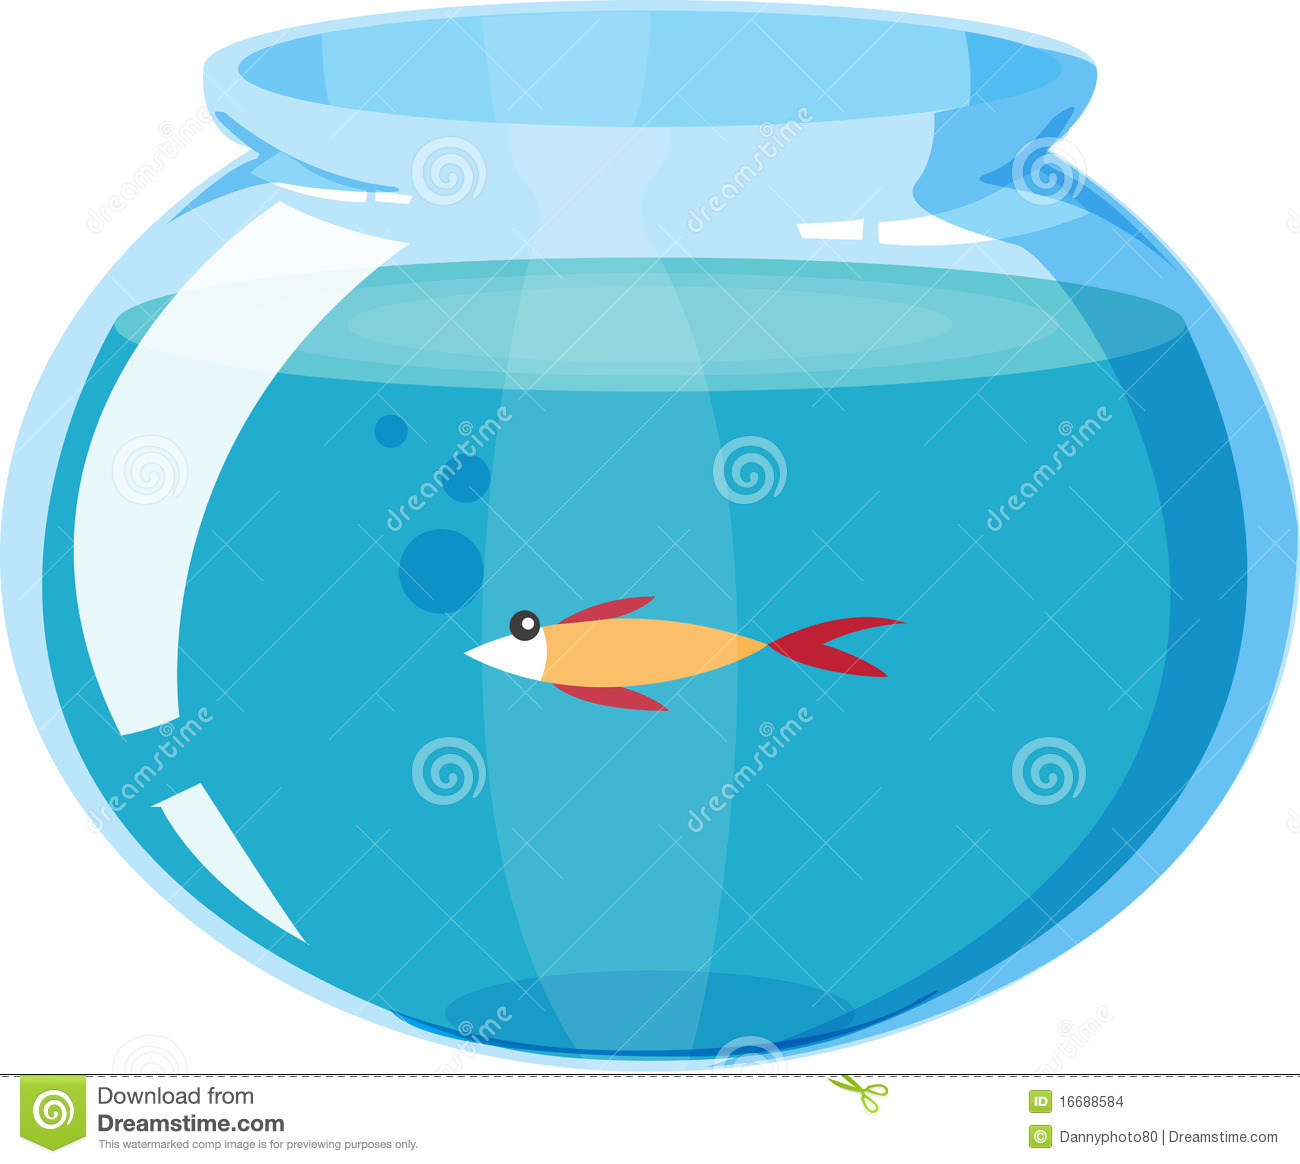 Fish Pond Clipart Fish Pond Stock Images